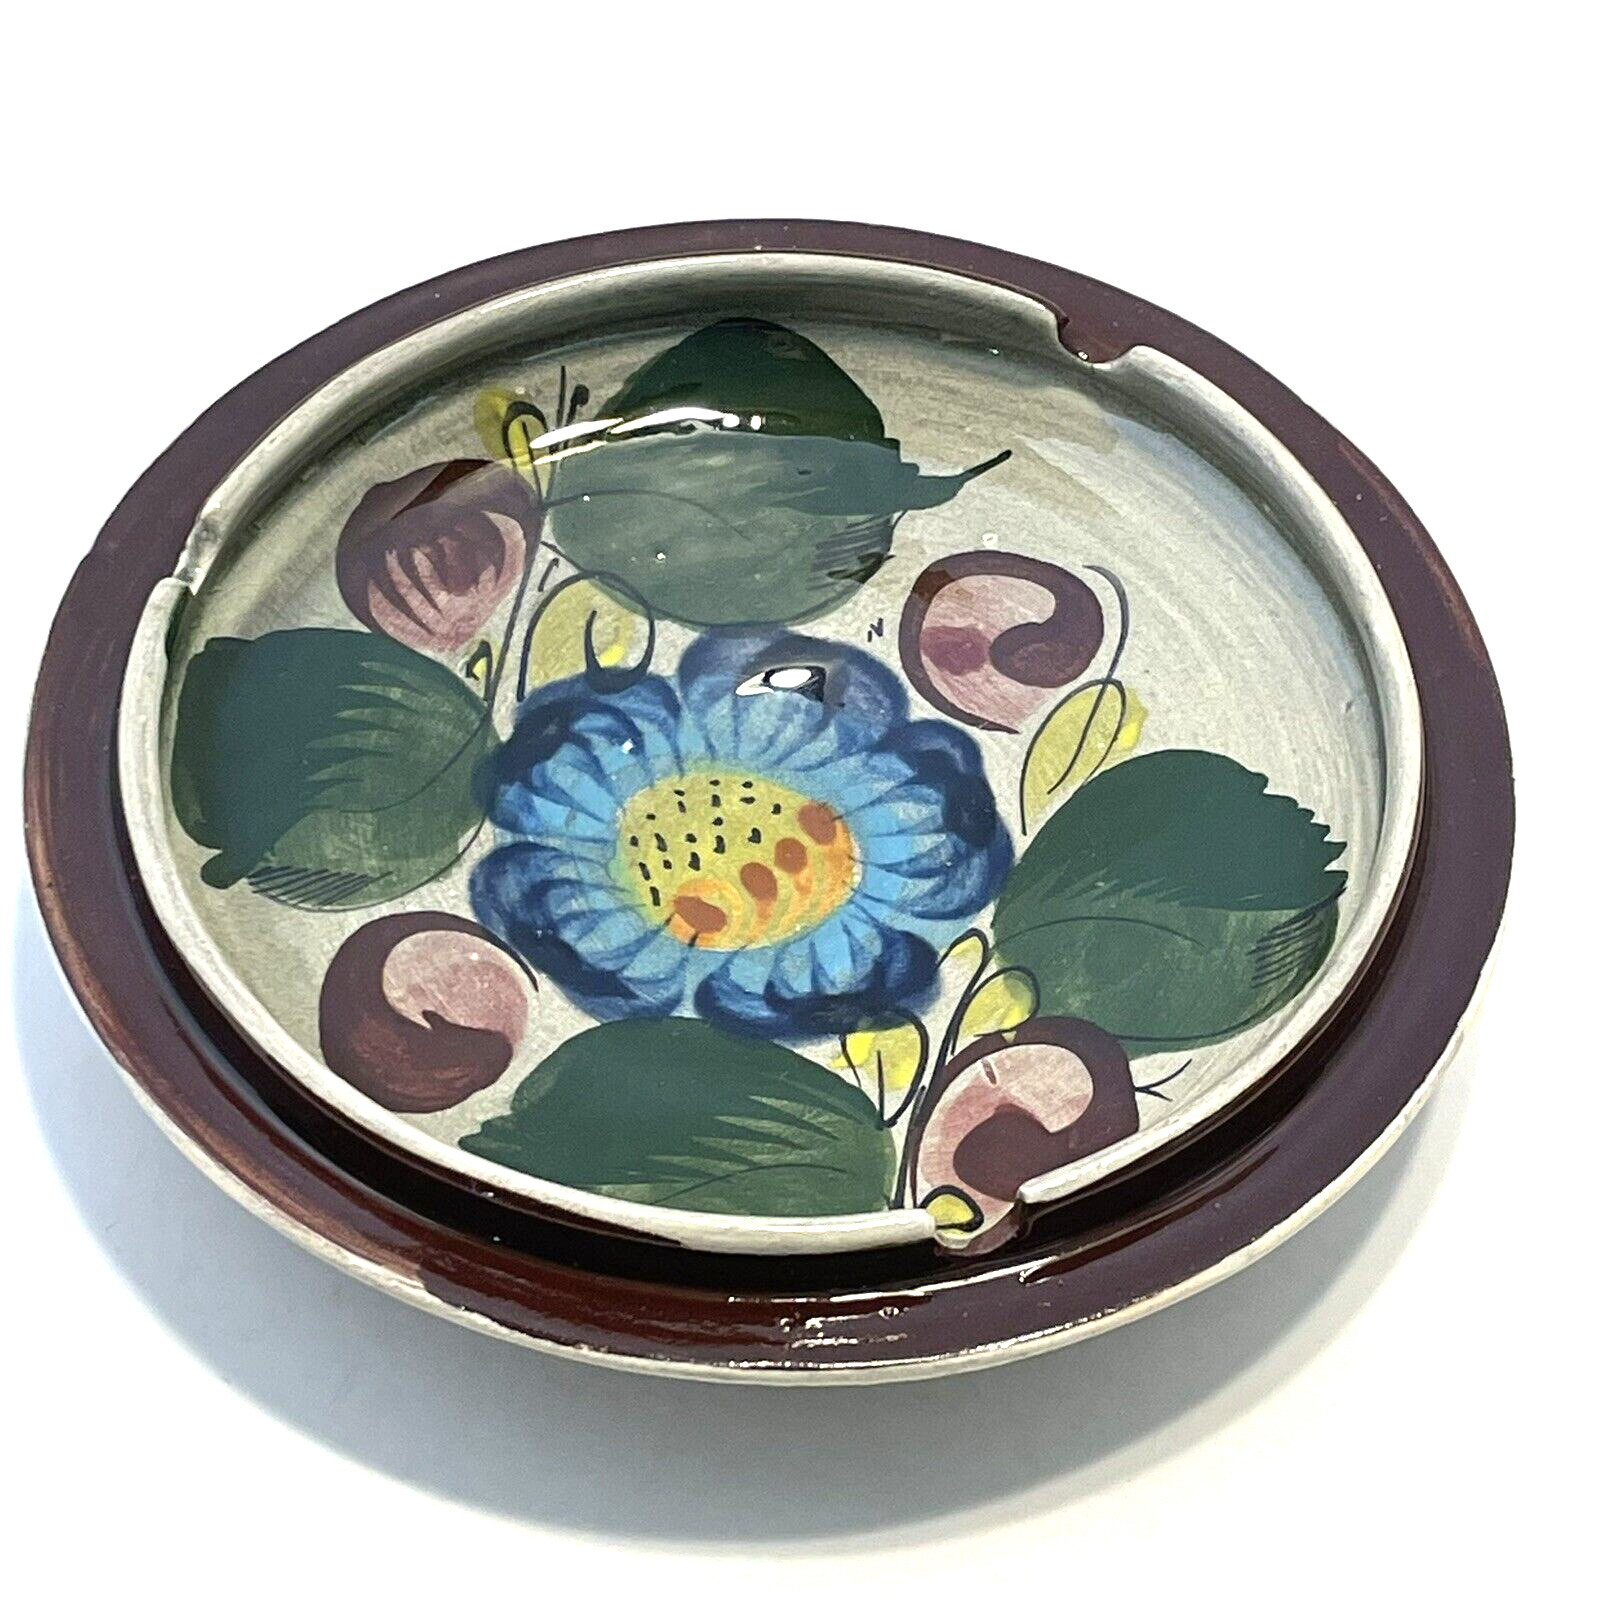 Vintage Pottery Ashtray Round Colorful Floral Hand Painted Made in Mexico 3 Slot